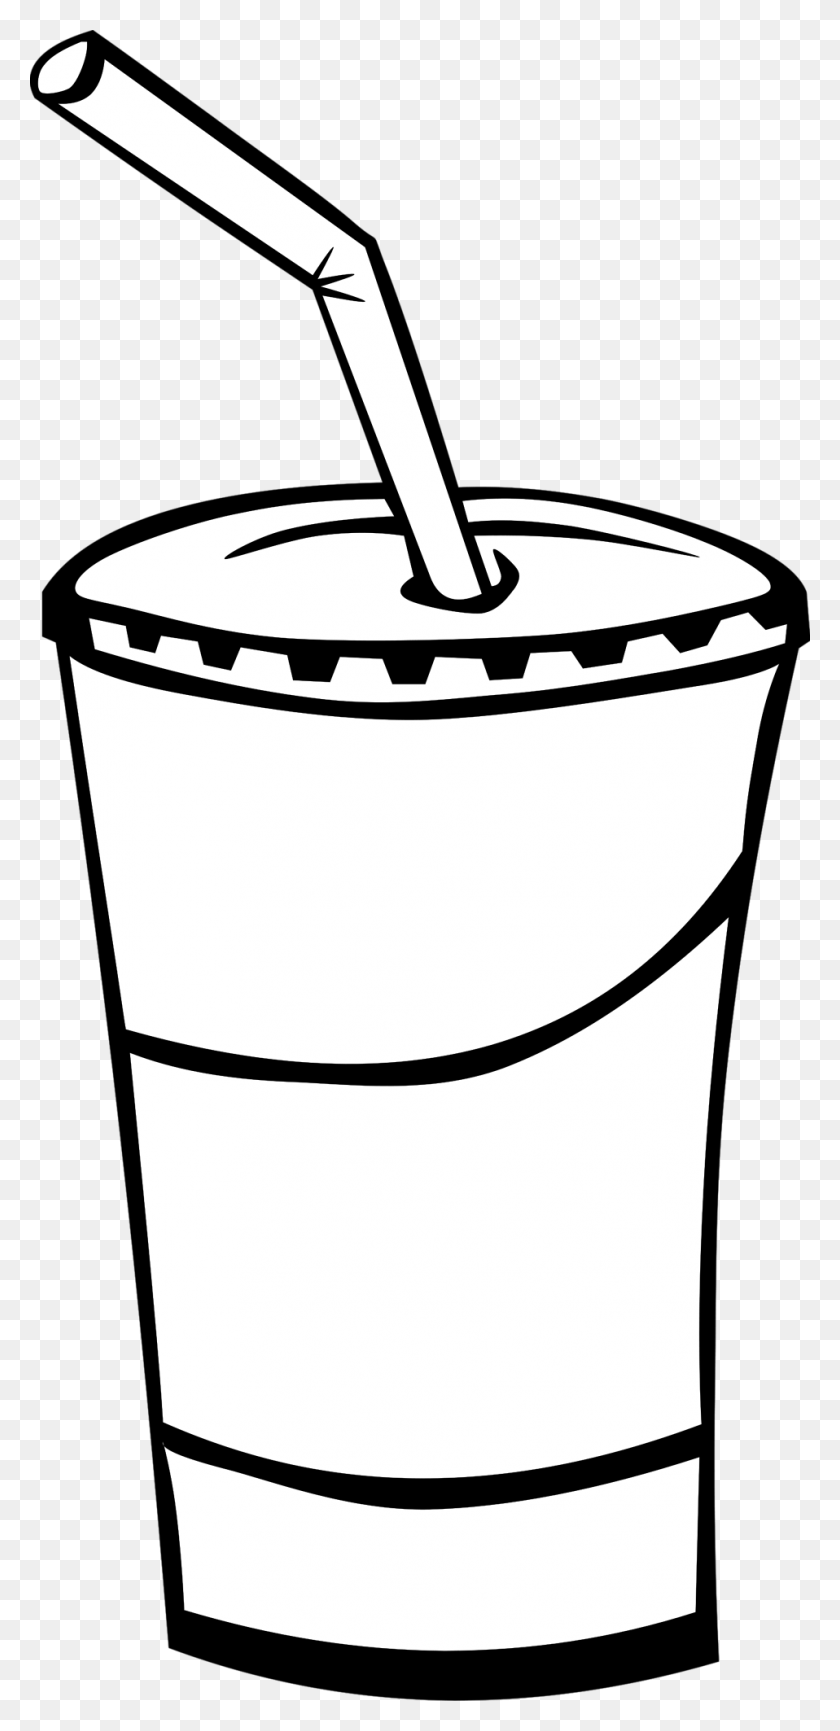 958x2053 Cup Free Stock Photo Illustration Of A Soda Cup - Soda Cup PNG